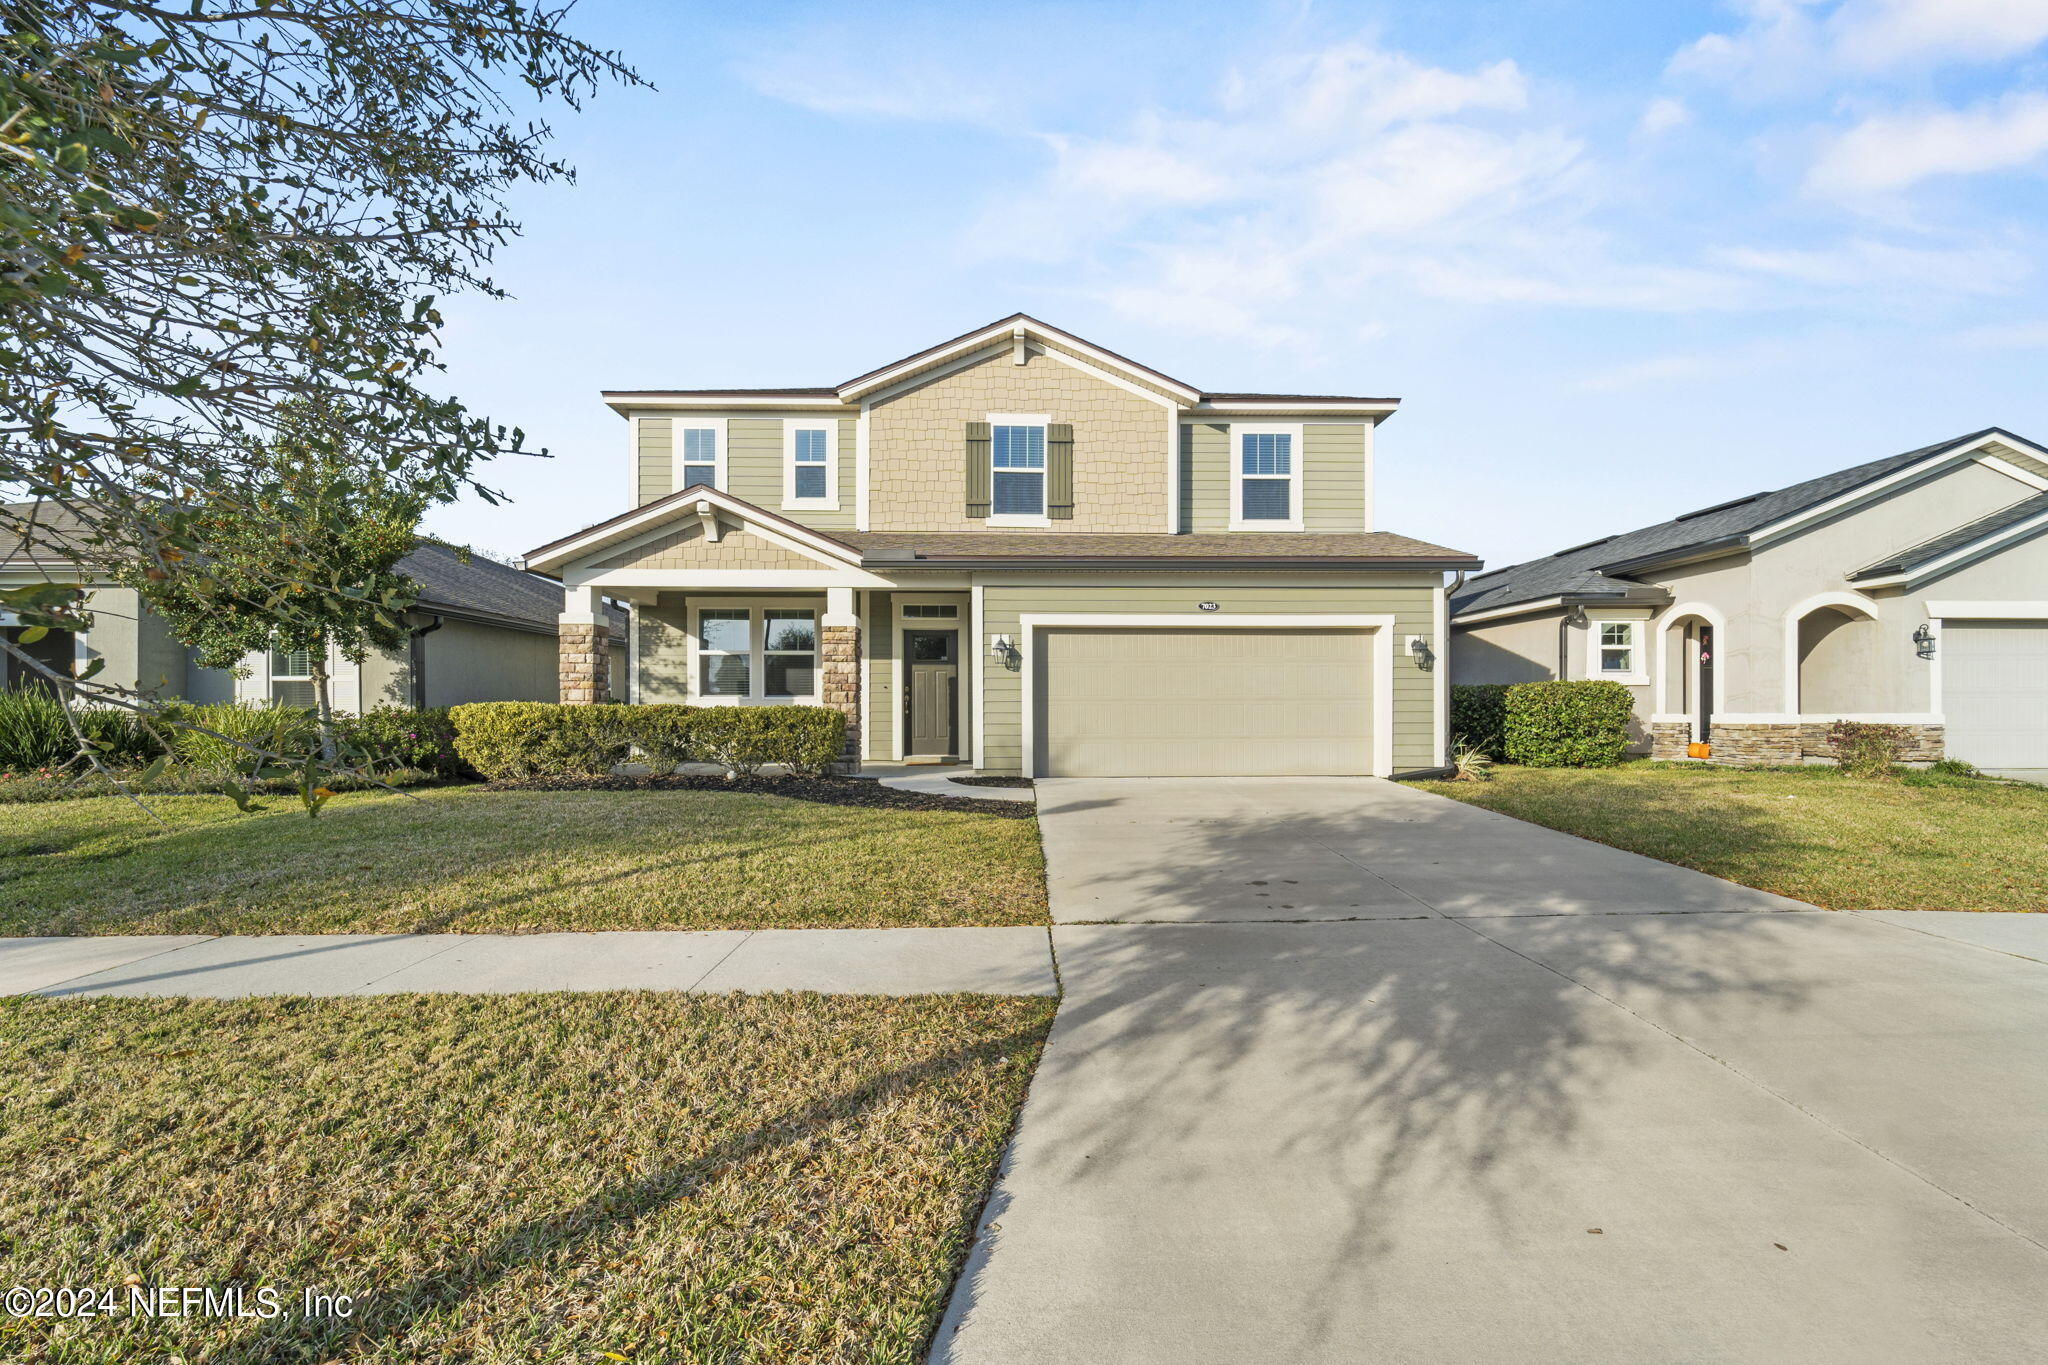 Jacksonville, FL home for sale located at 7023 BARTRAM COVE Parkway, Jacksonville, FL 32258